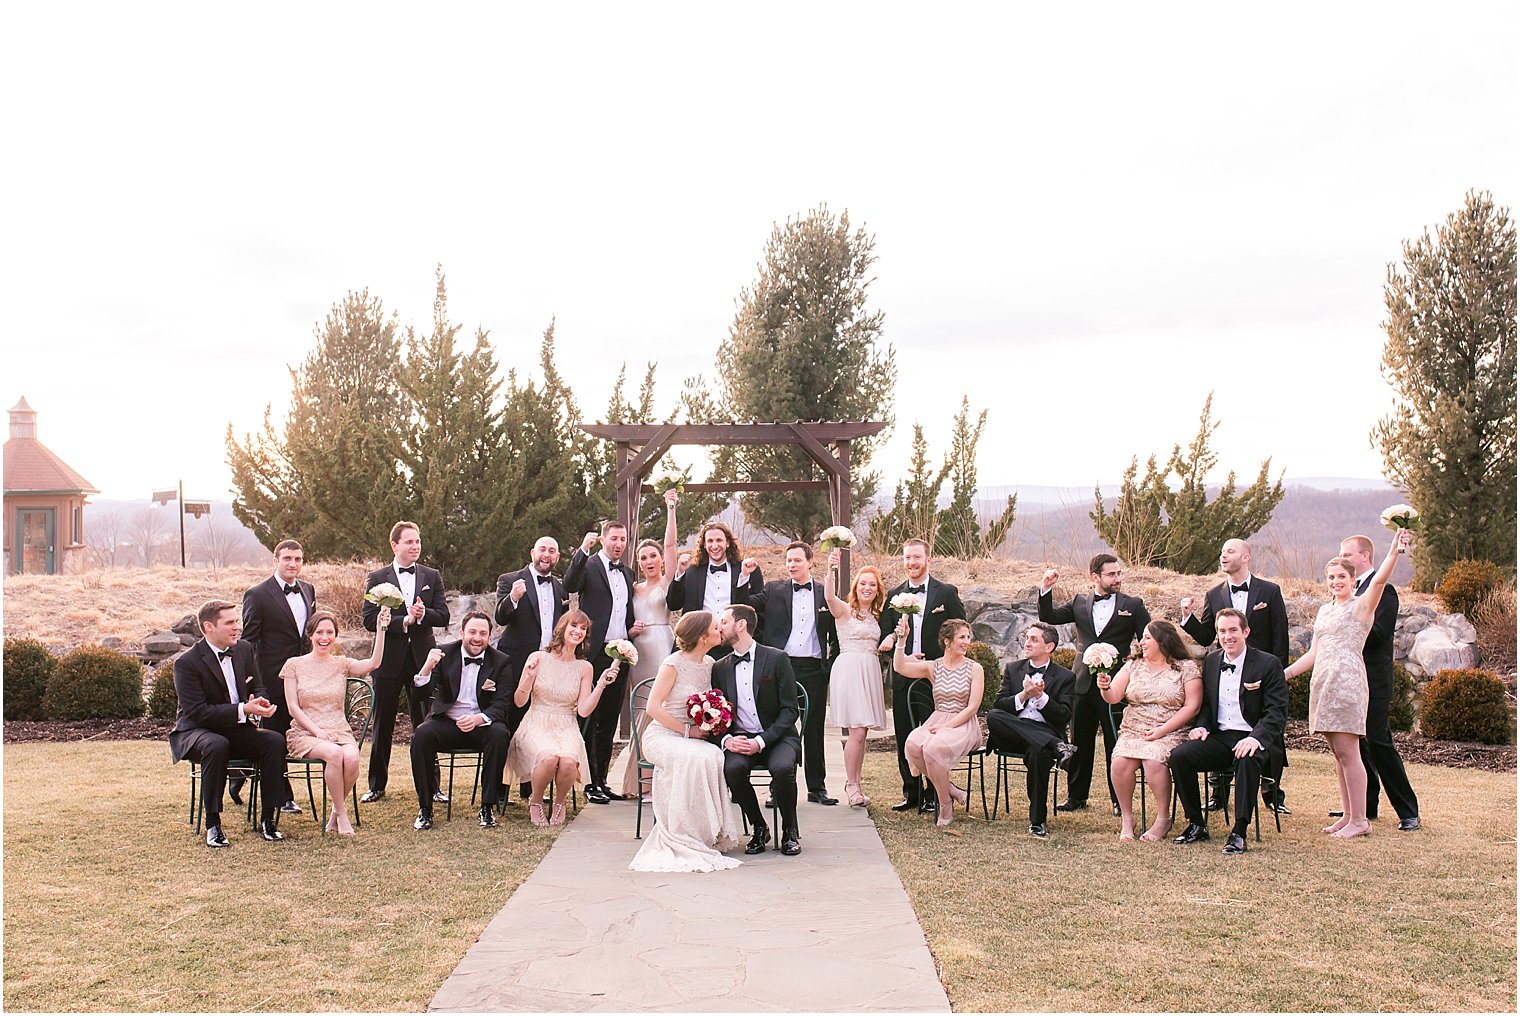 How to pose a large bridal party | Photo by Idalia Photography